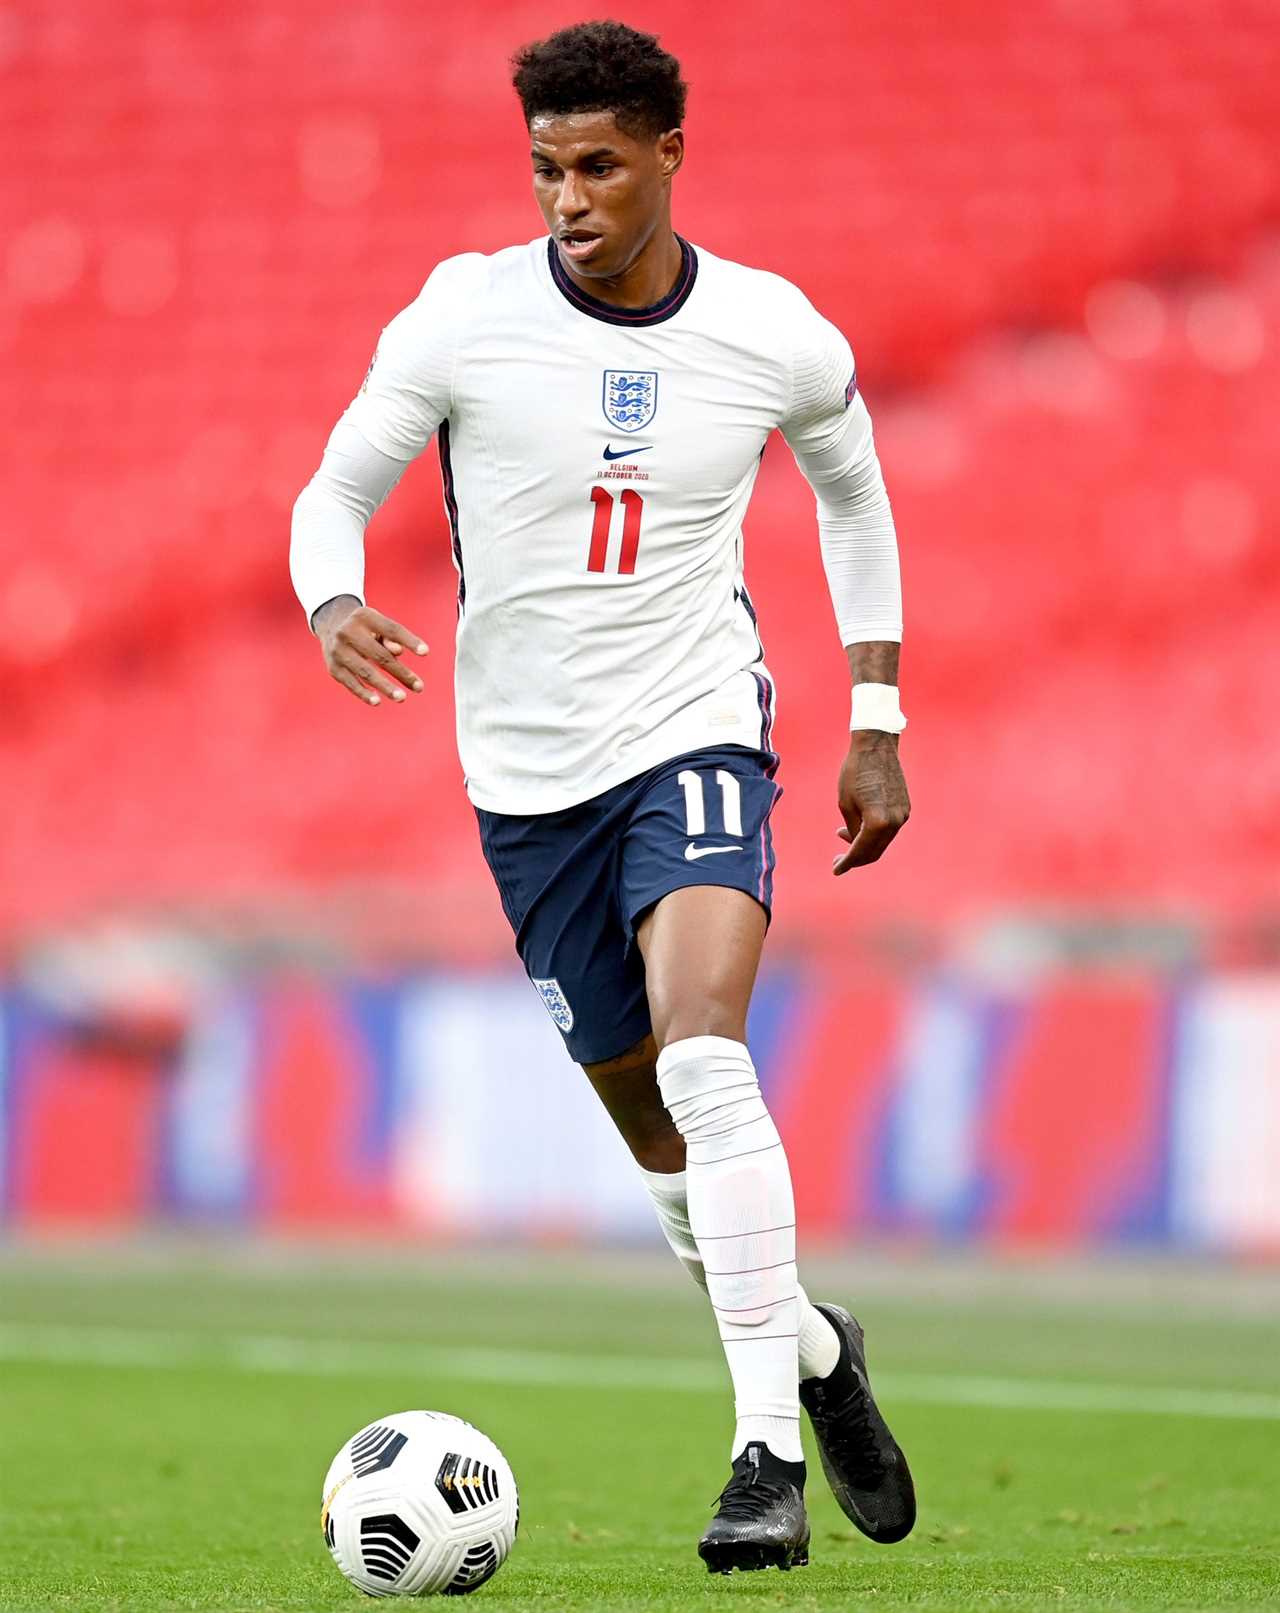 Gavin Williamson boasts about meeting Marcus Rashford – but it was actually England rugby pro Maro Itoje